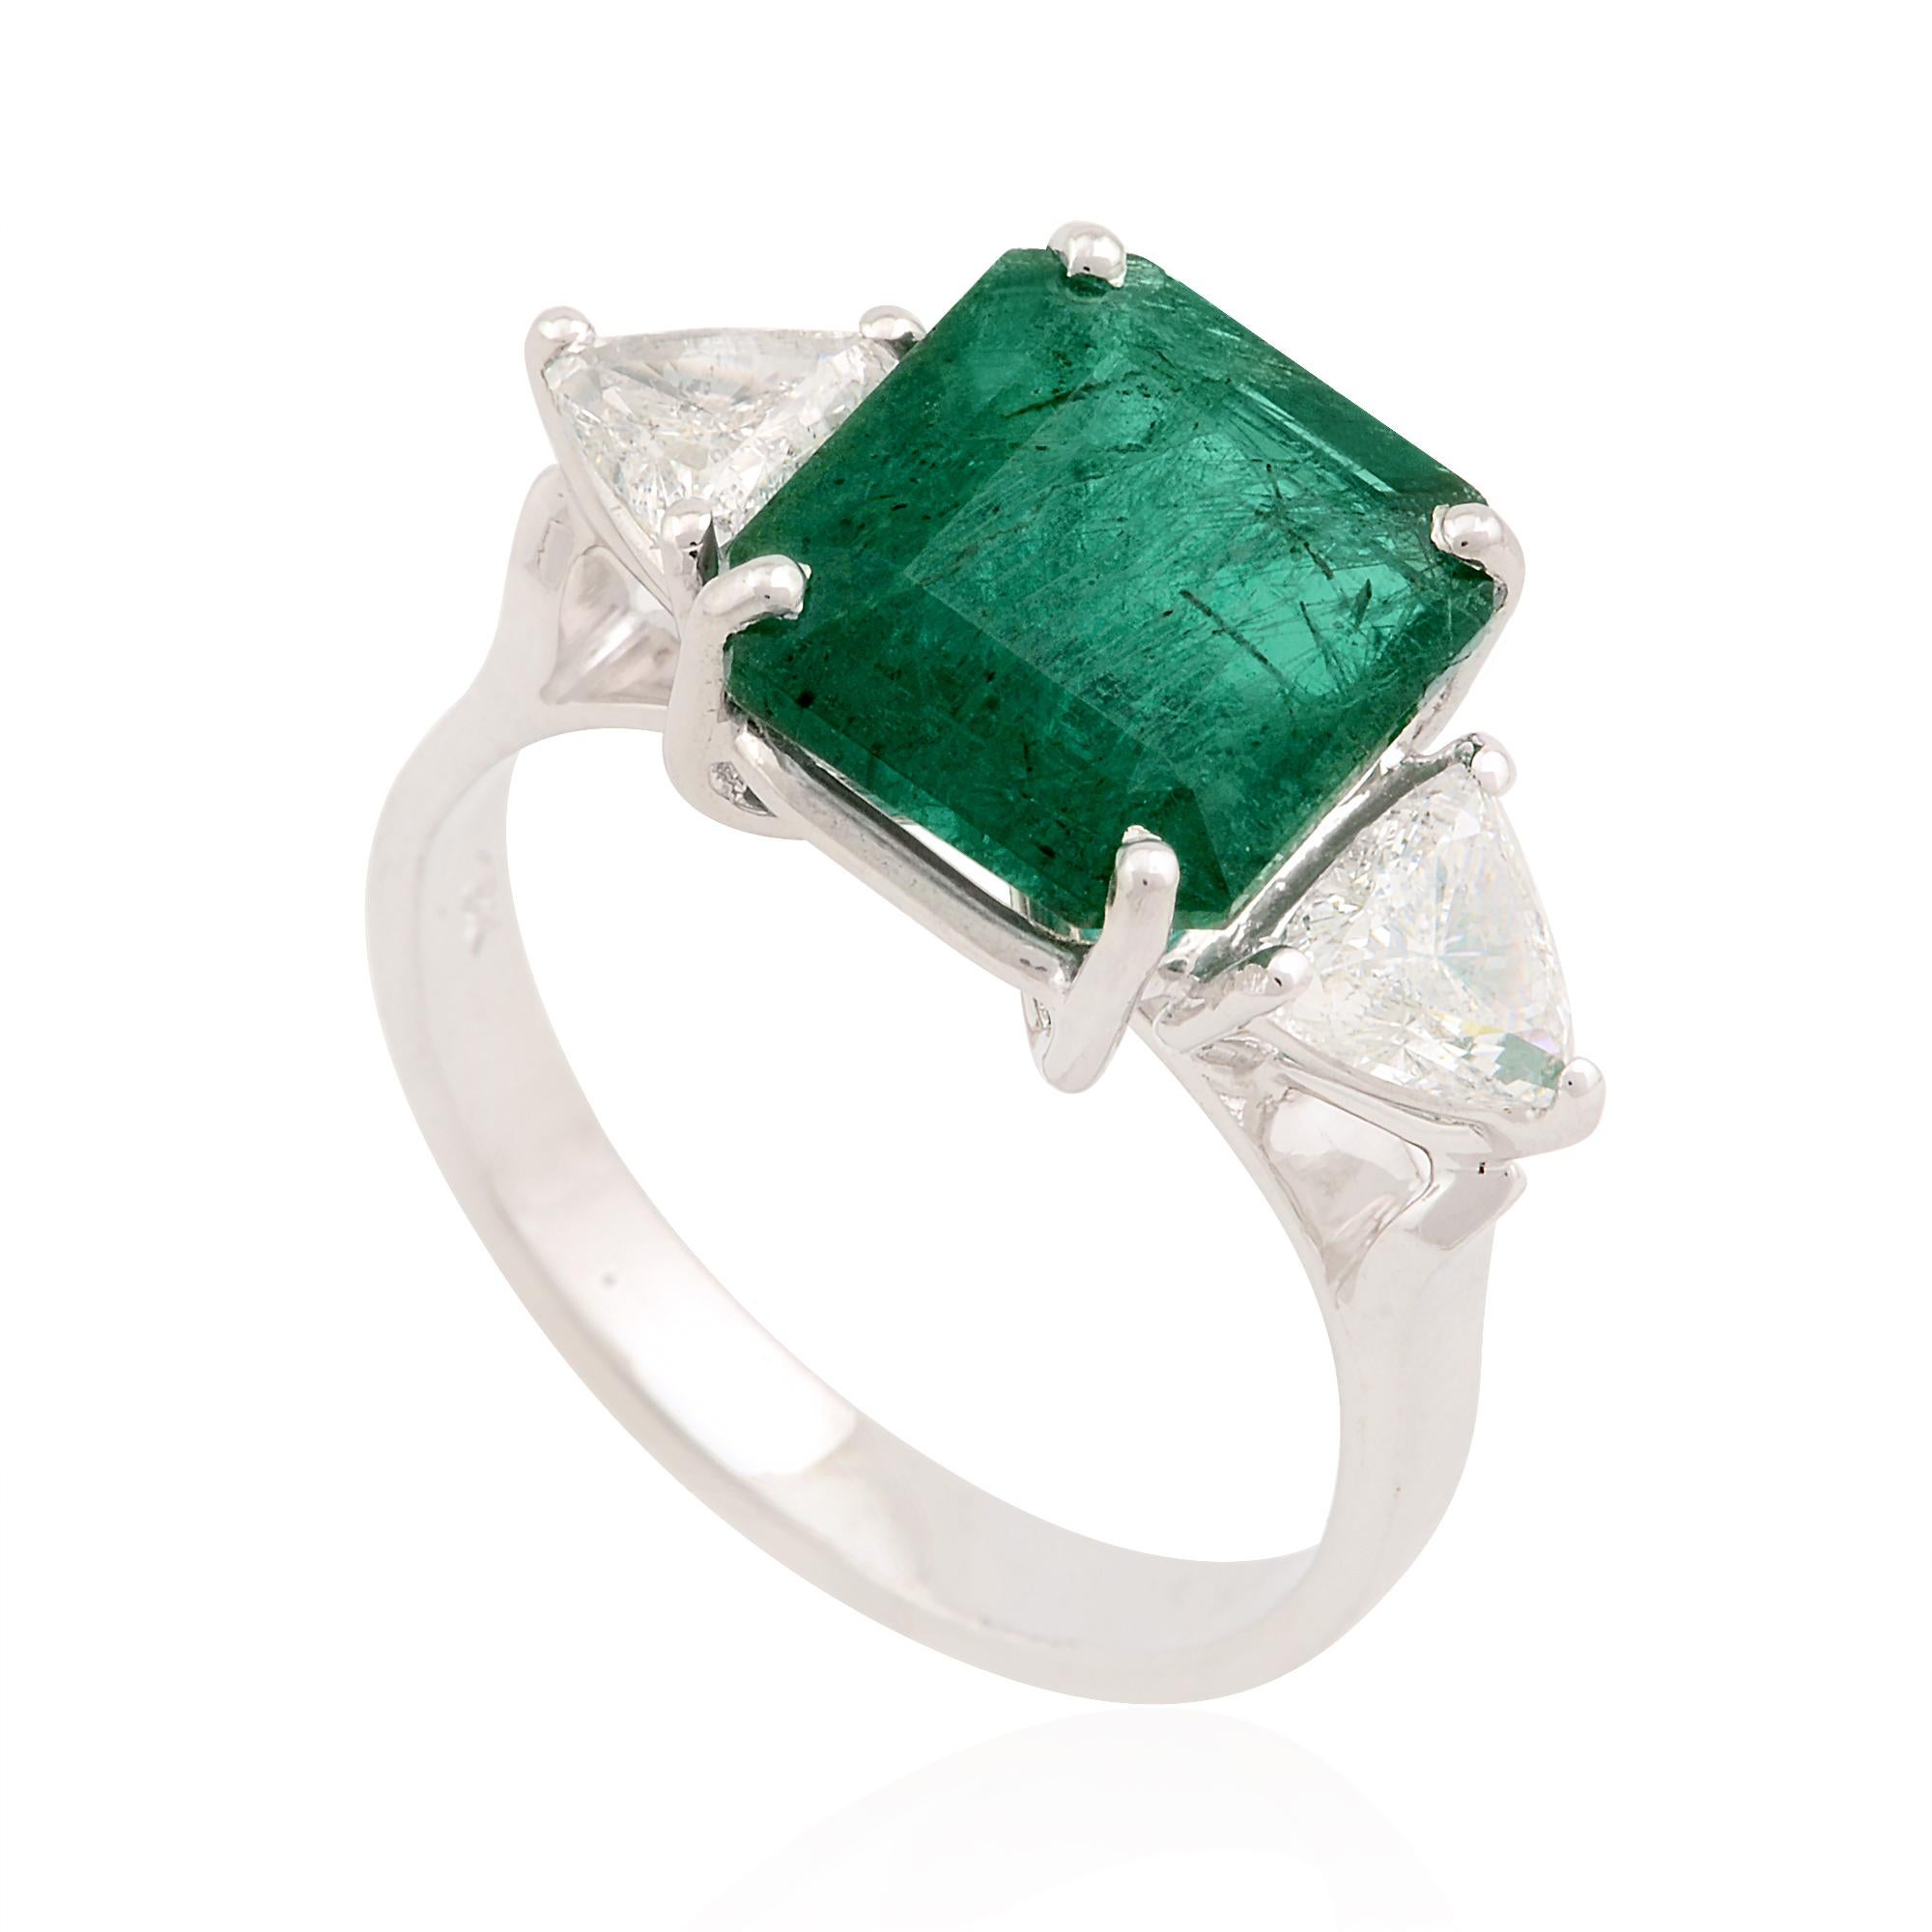 Natural Emerald Gemstone Cocktail Ring Pear Diamond Solid 18k White Gold Jewelry 3